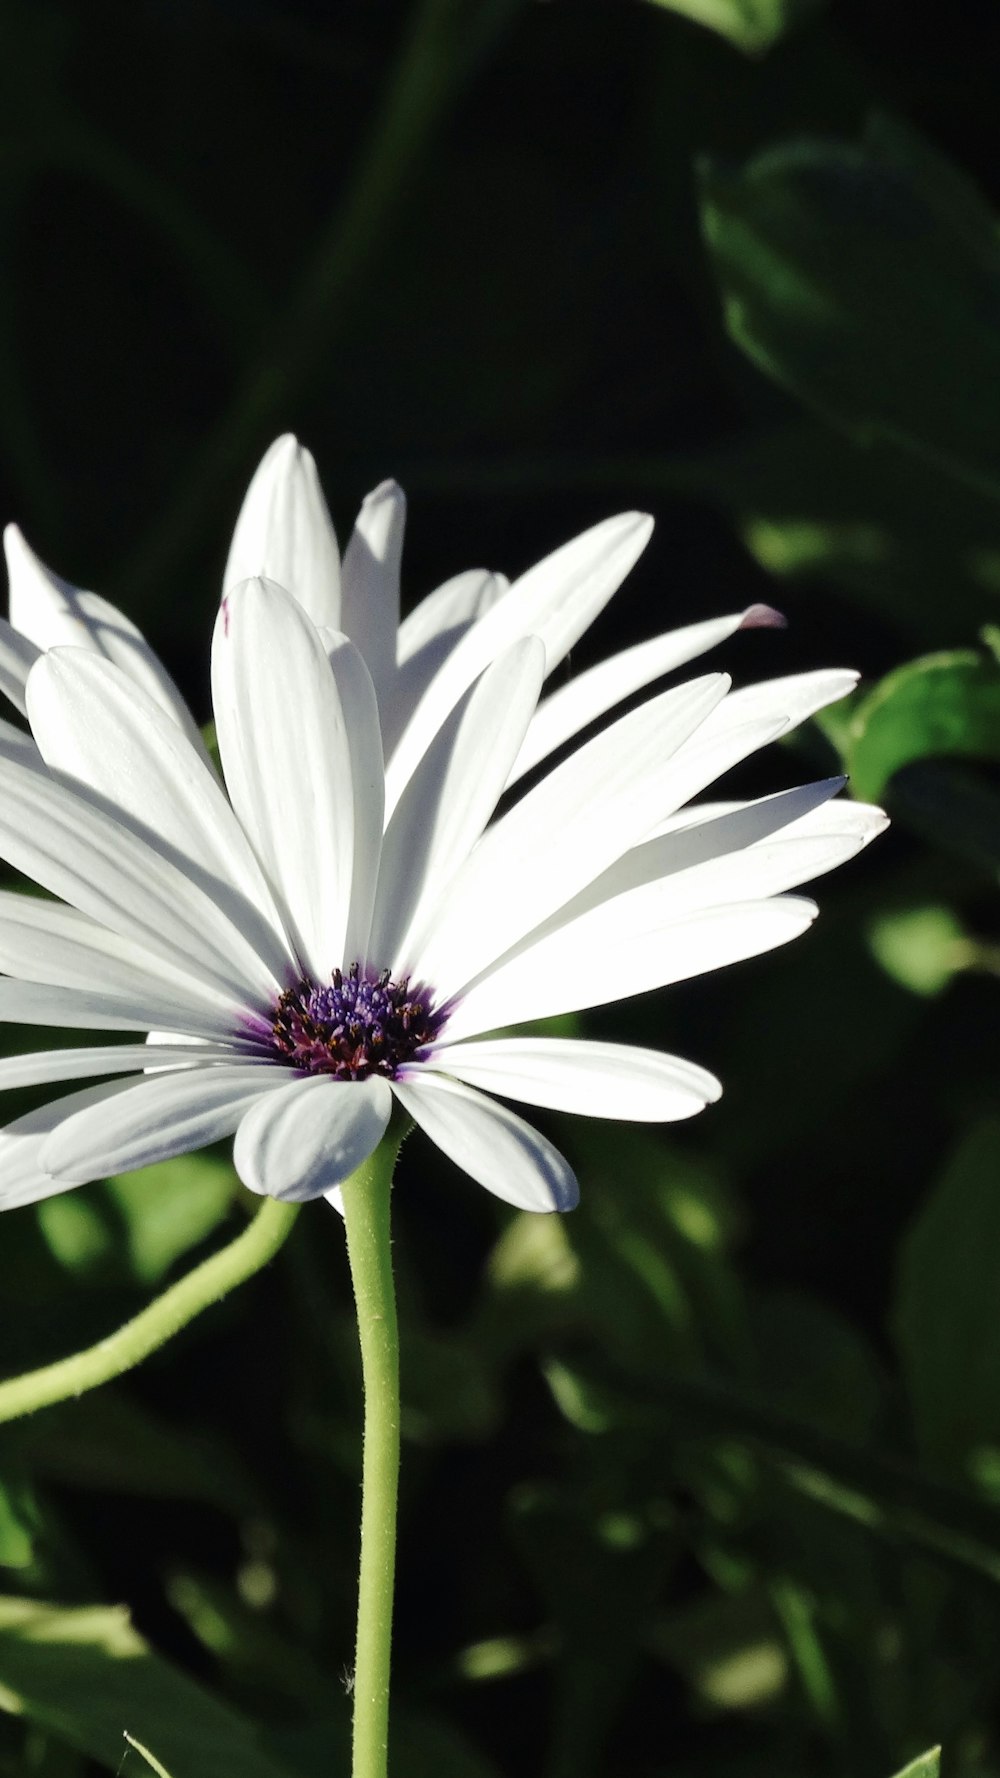 a white flower with a purple center